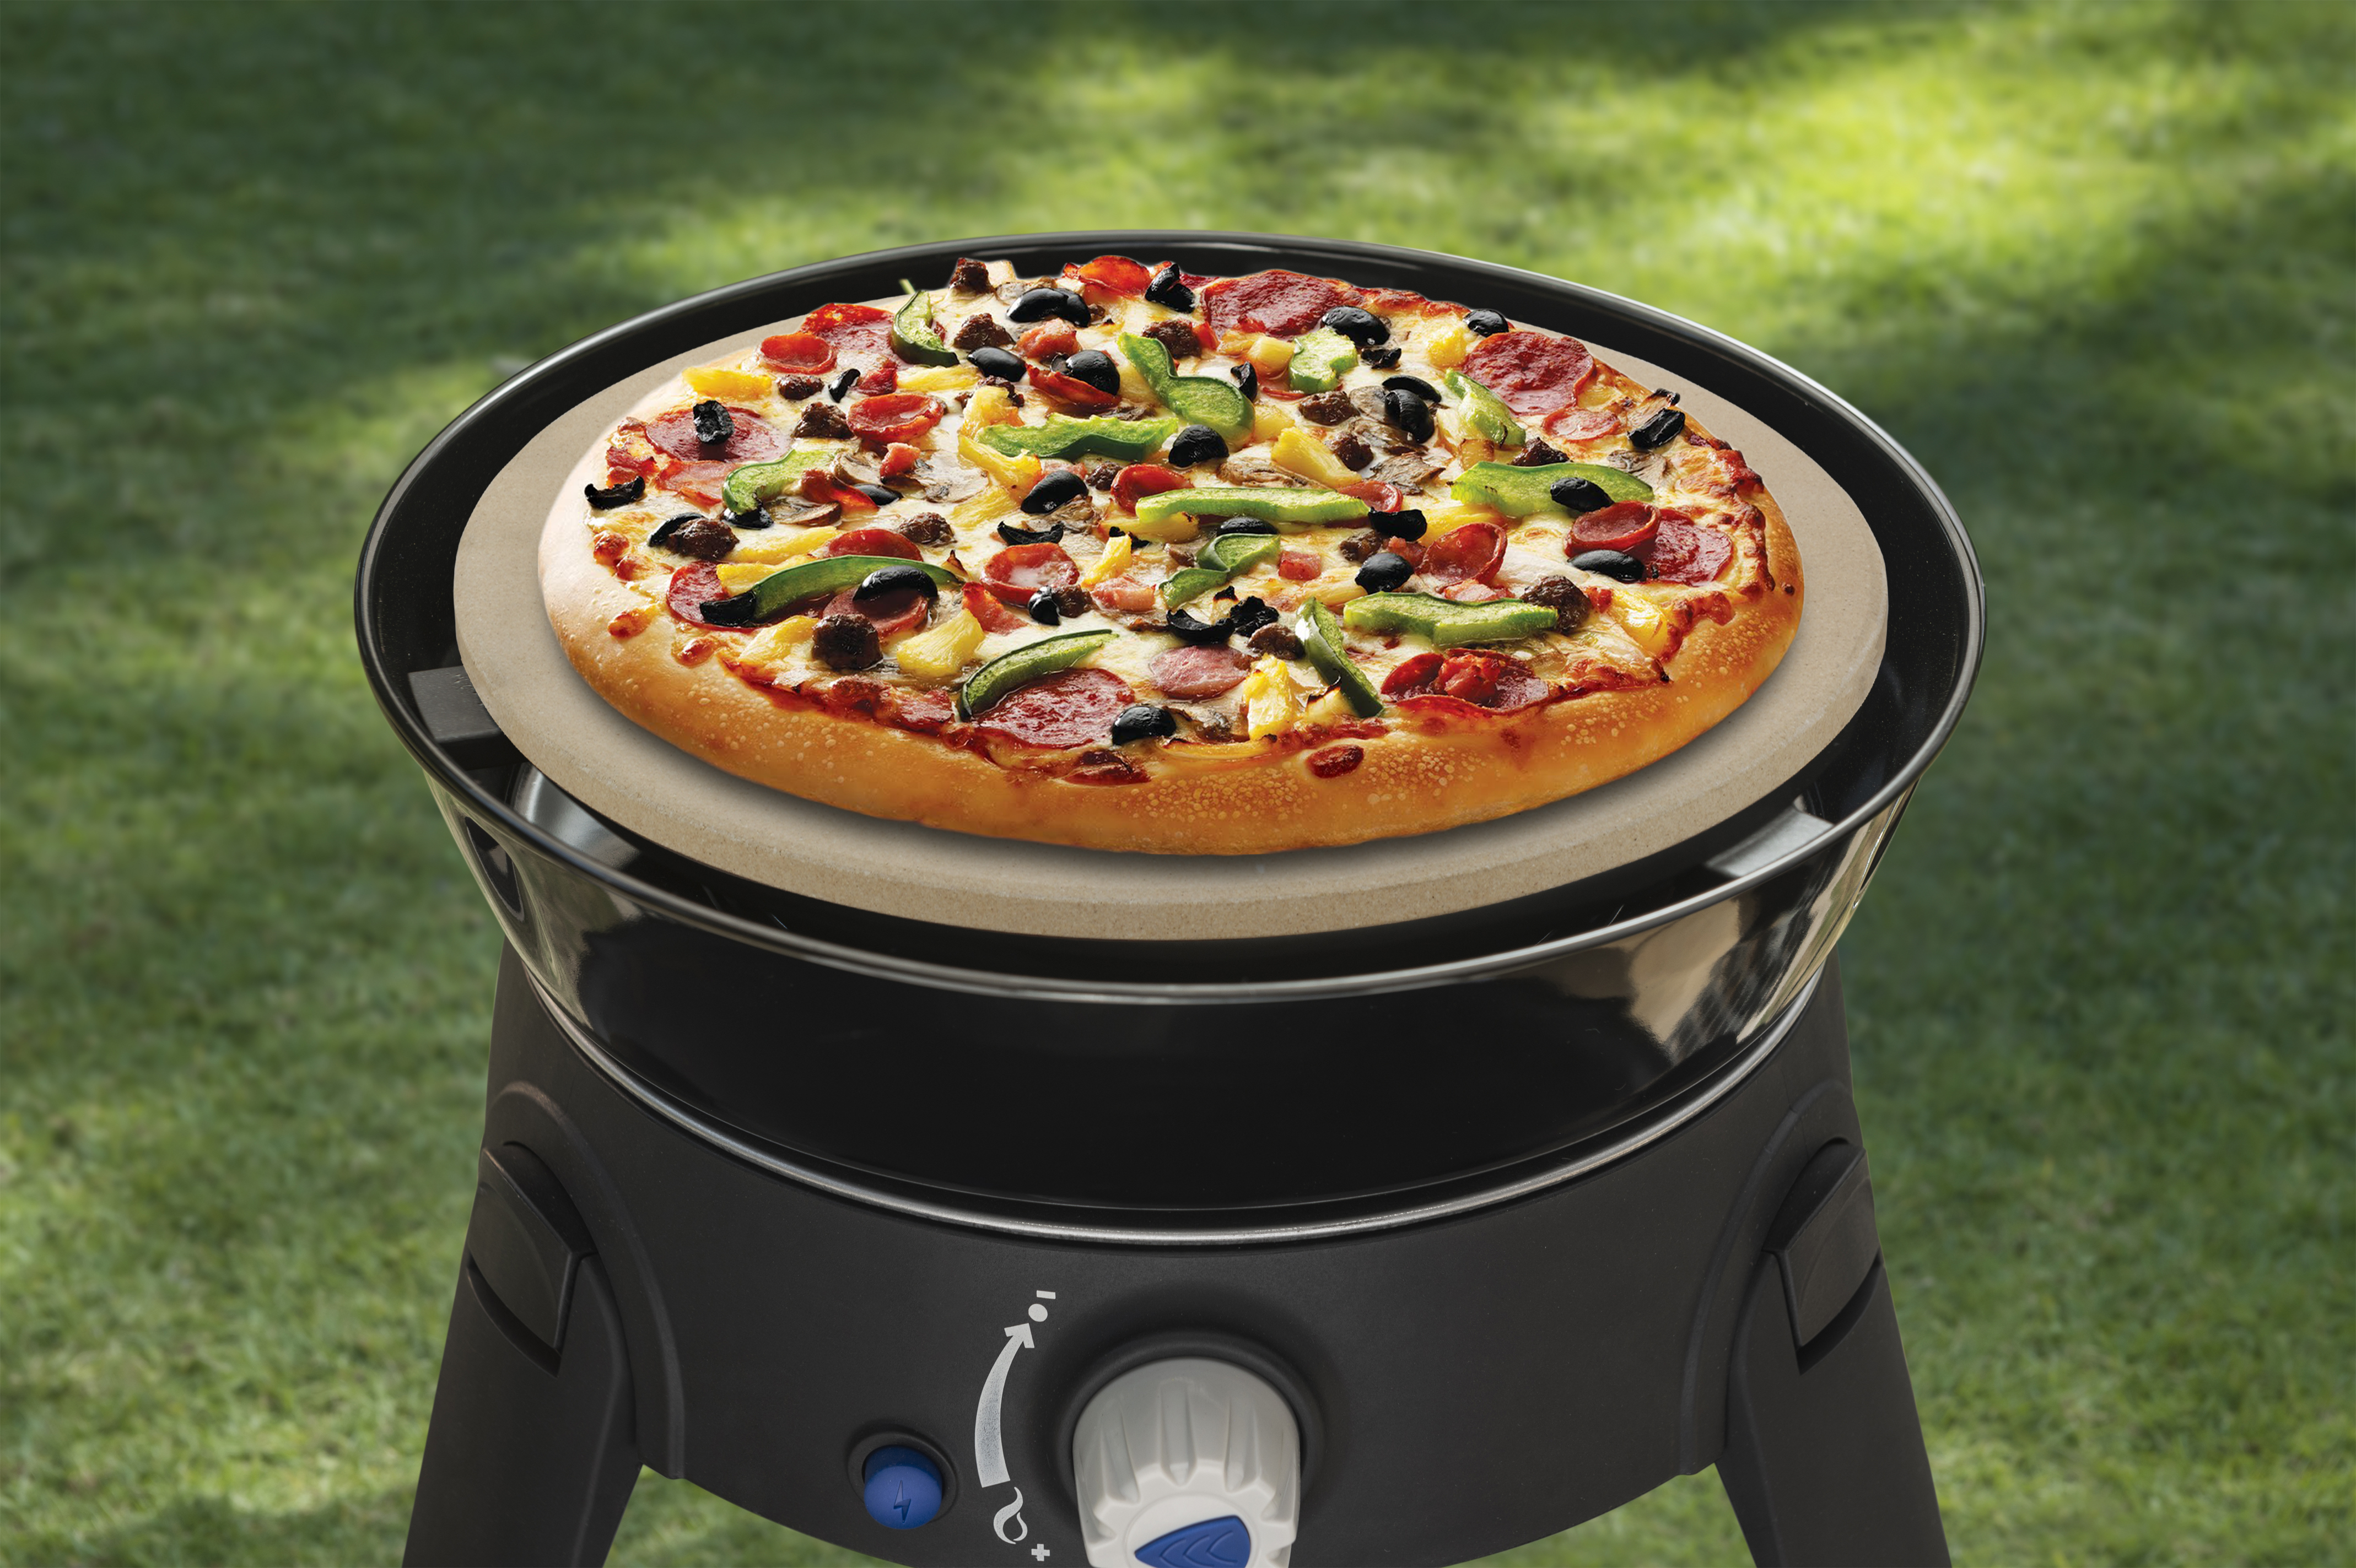 Bake pizza on your BBQ